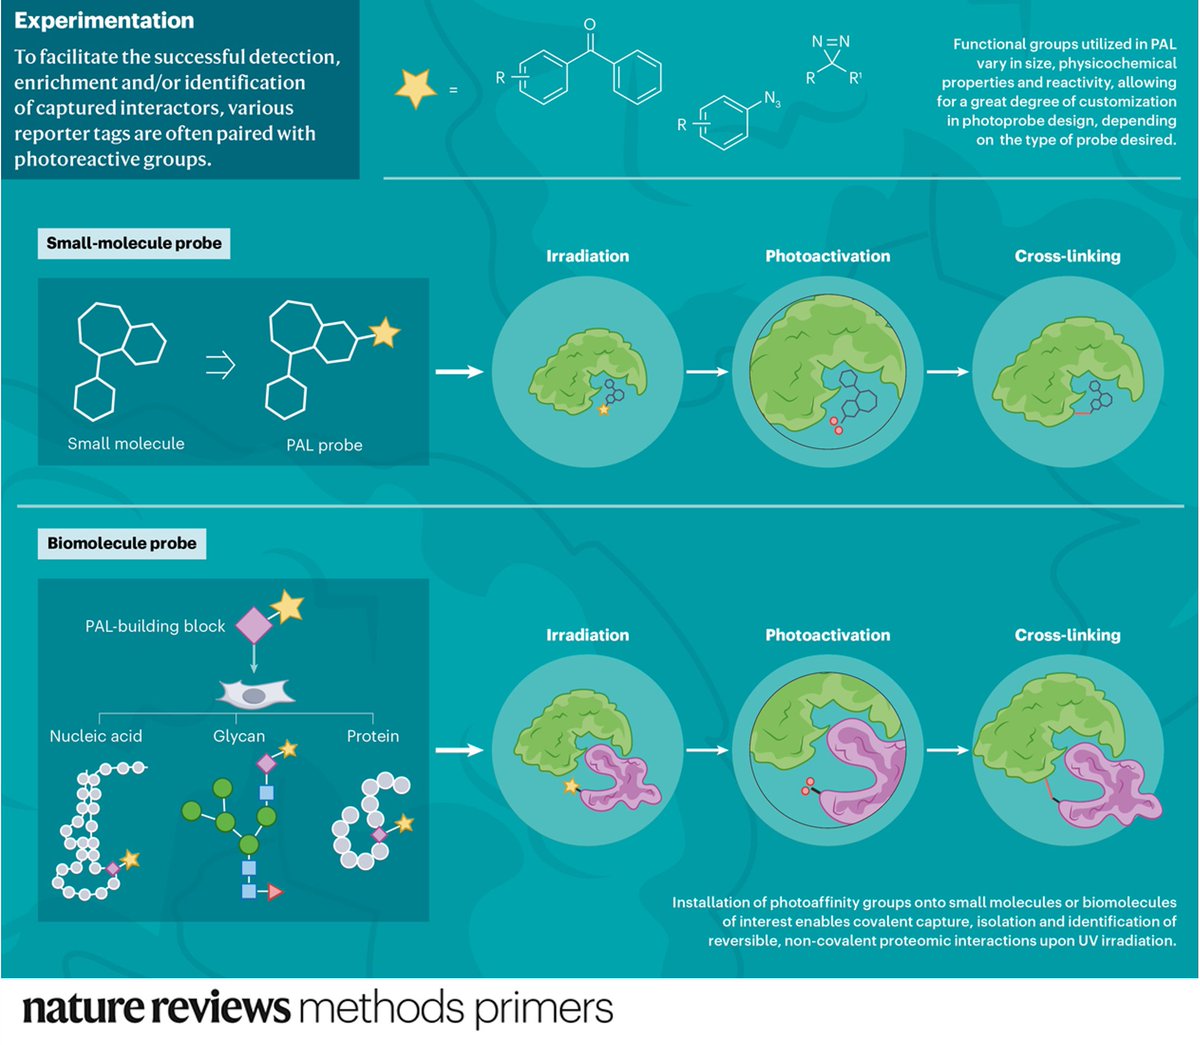 Our latest PrimeView highlights the different types of reporter tags that can be paired with photoreactive groups for photoaffinity labeling. Free to download for a week: go.nature.com/44rz5Tt